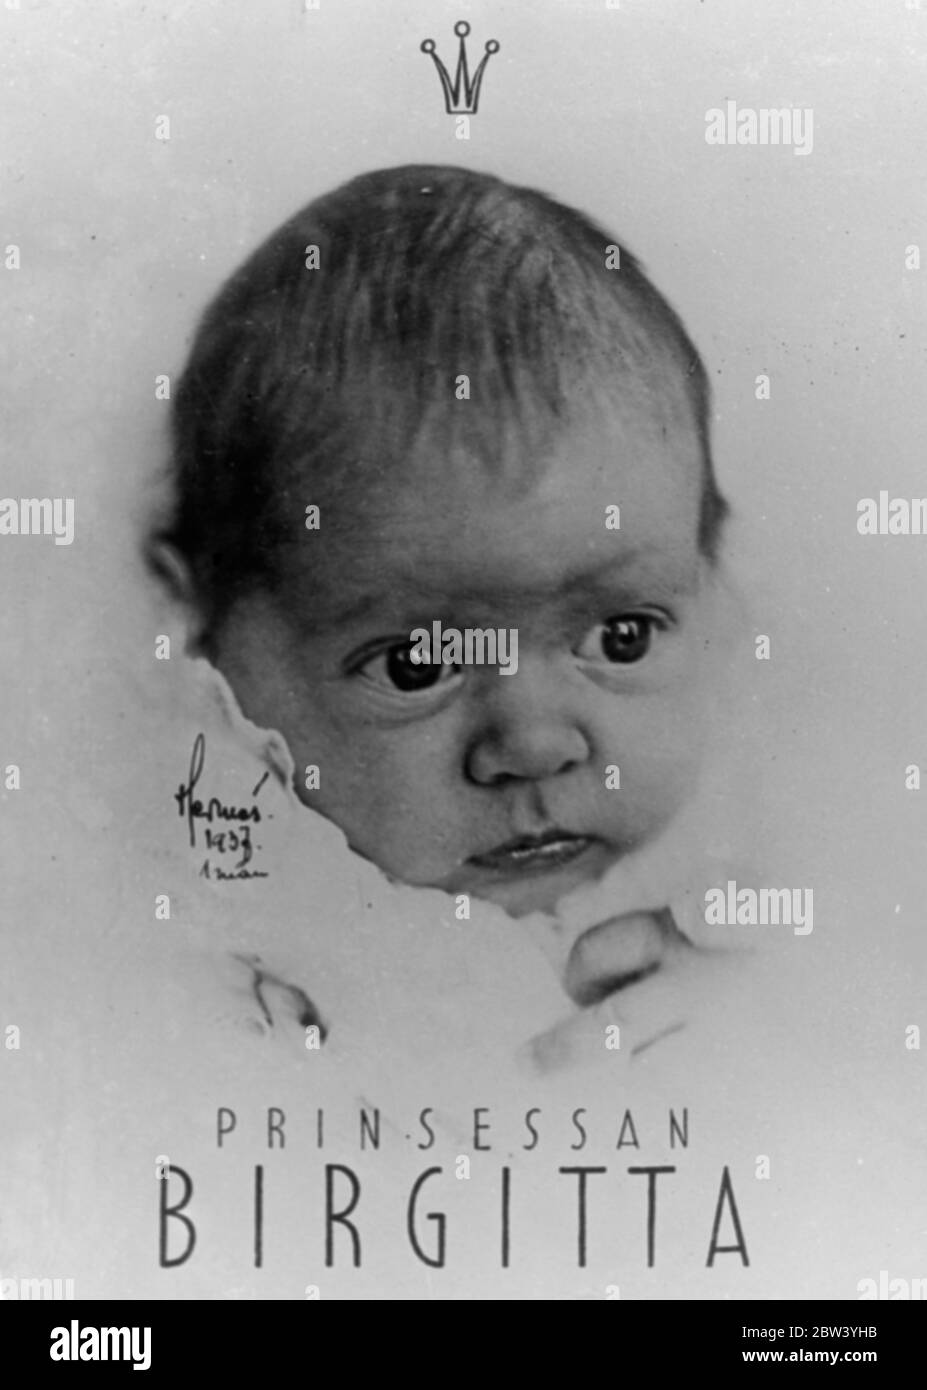 Sweden's baby Princess - new picture. Photo shows: Sweden's large-eyed royal baby - Princess Birgitta - the one month old daughter of Prince Gustav Adolf and Princess Sibylla. 25 February 1937 Stock Photo